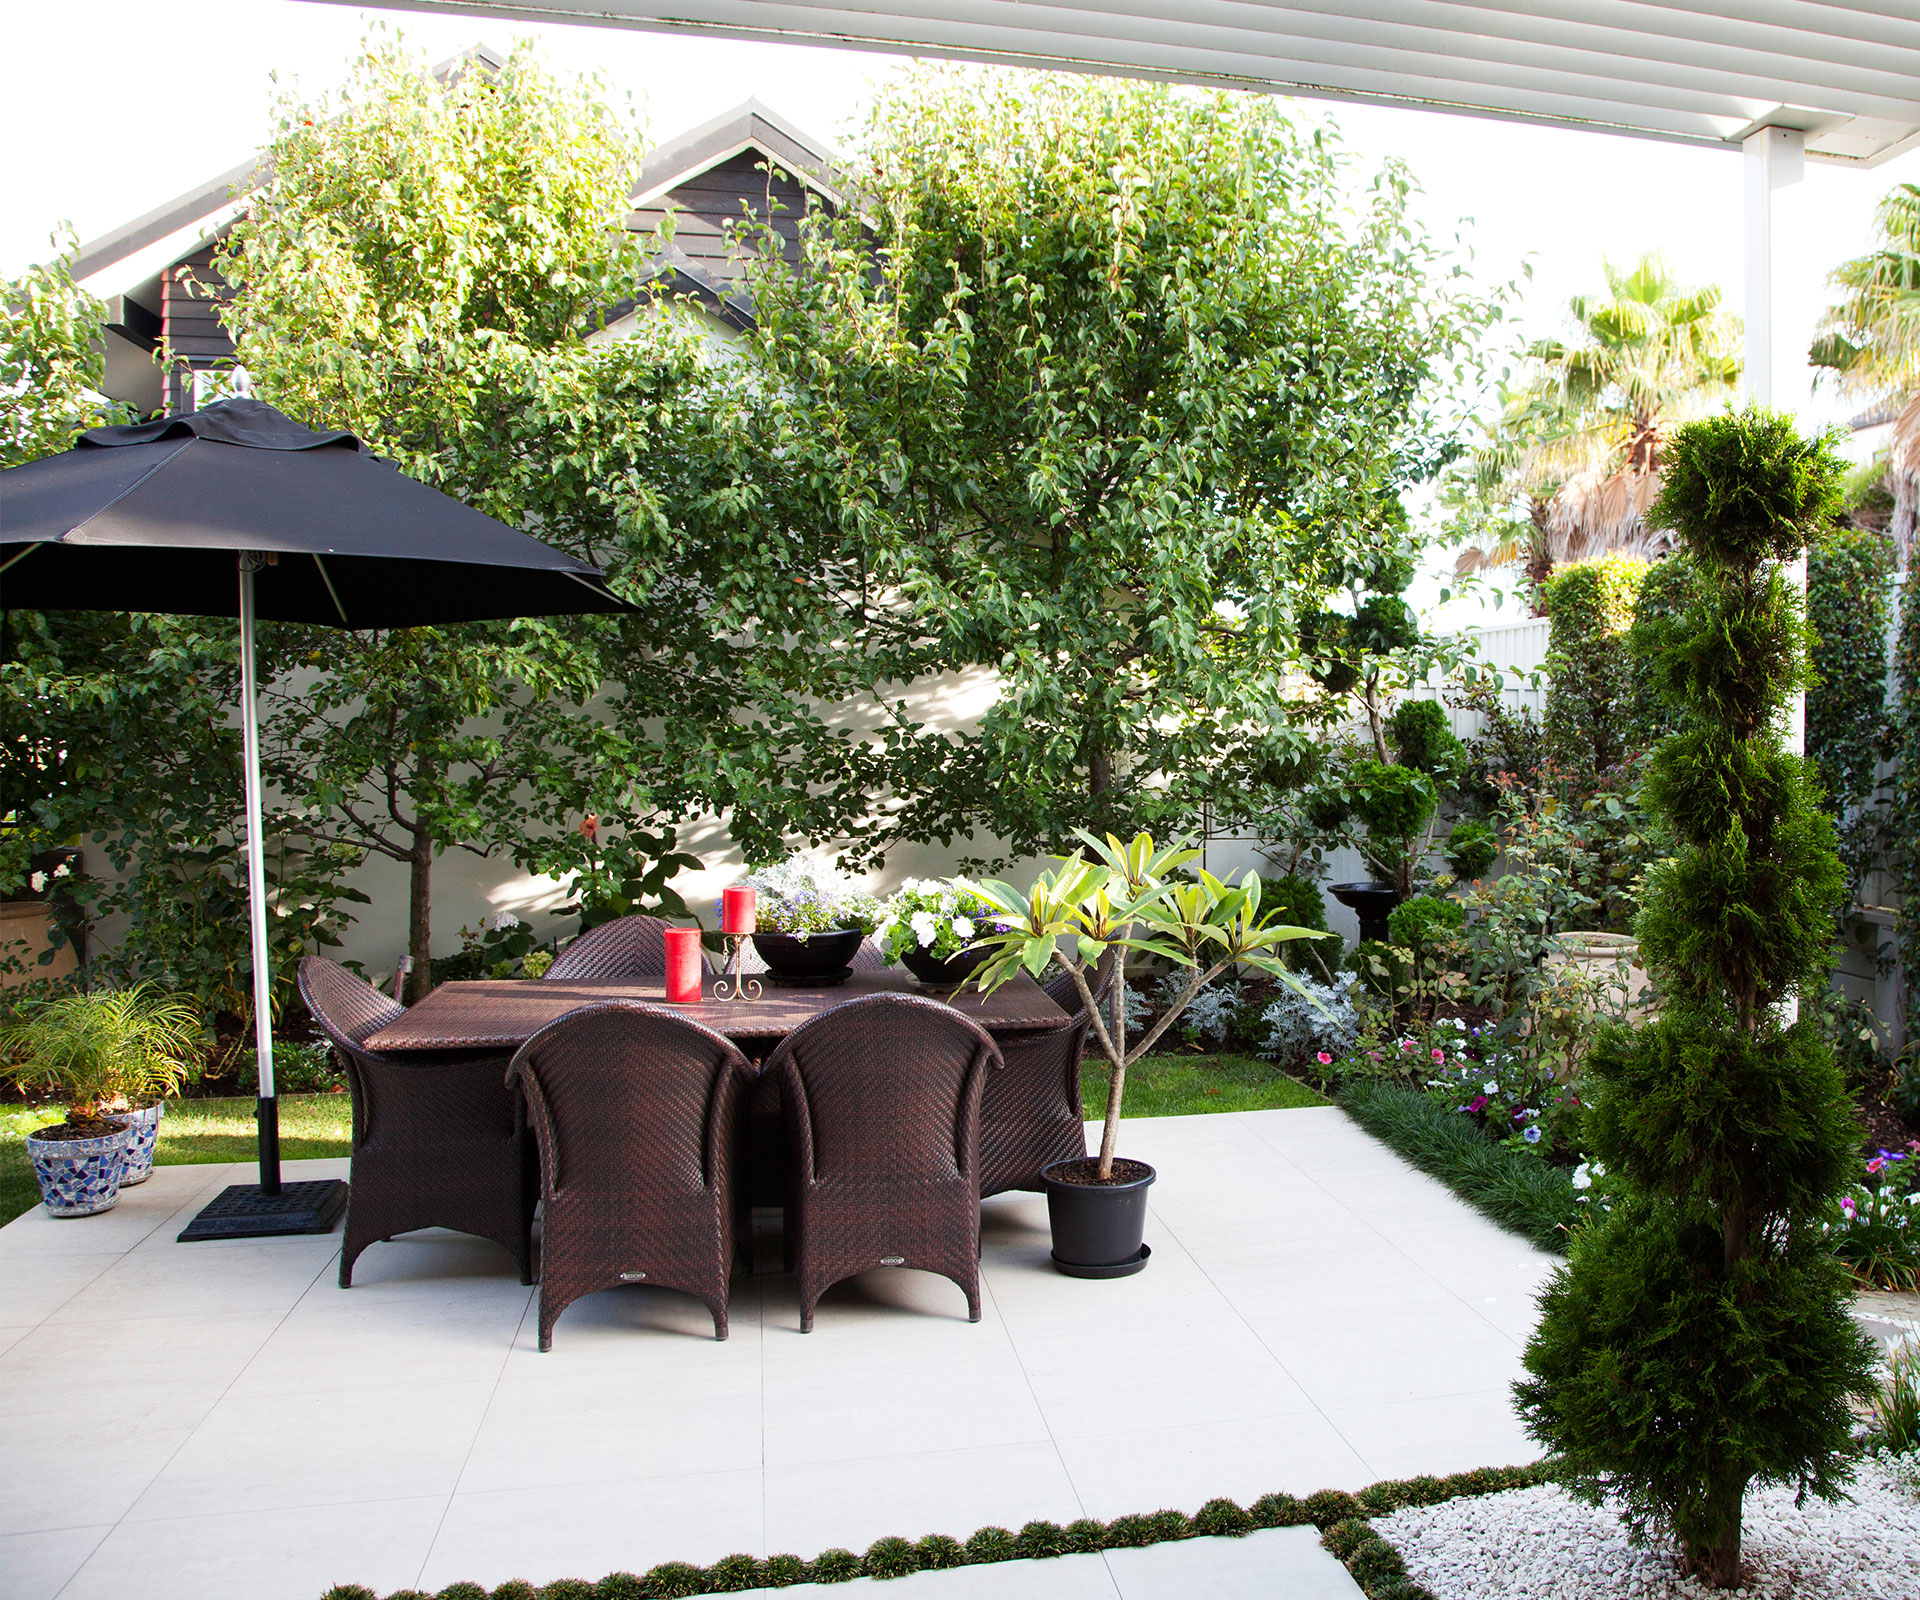 this picture-perfect courtyard garden is small in size but perfectly